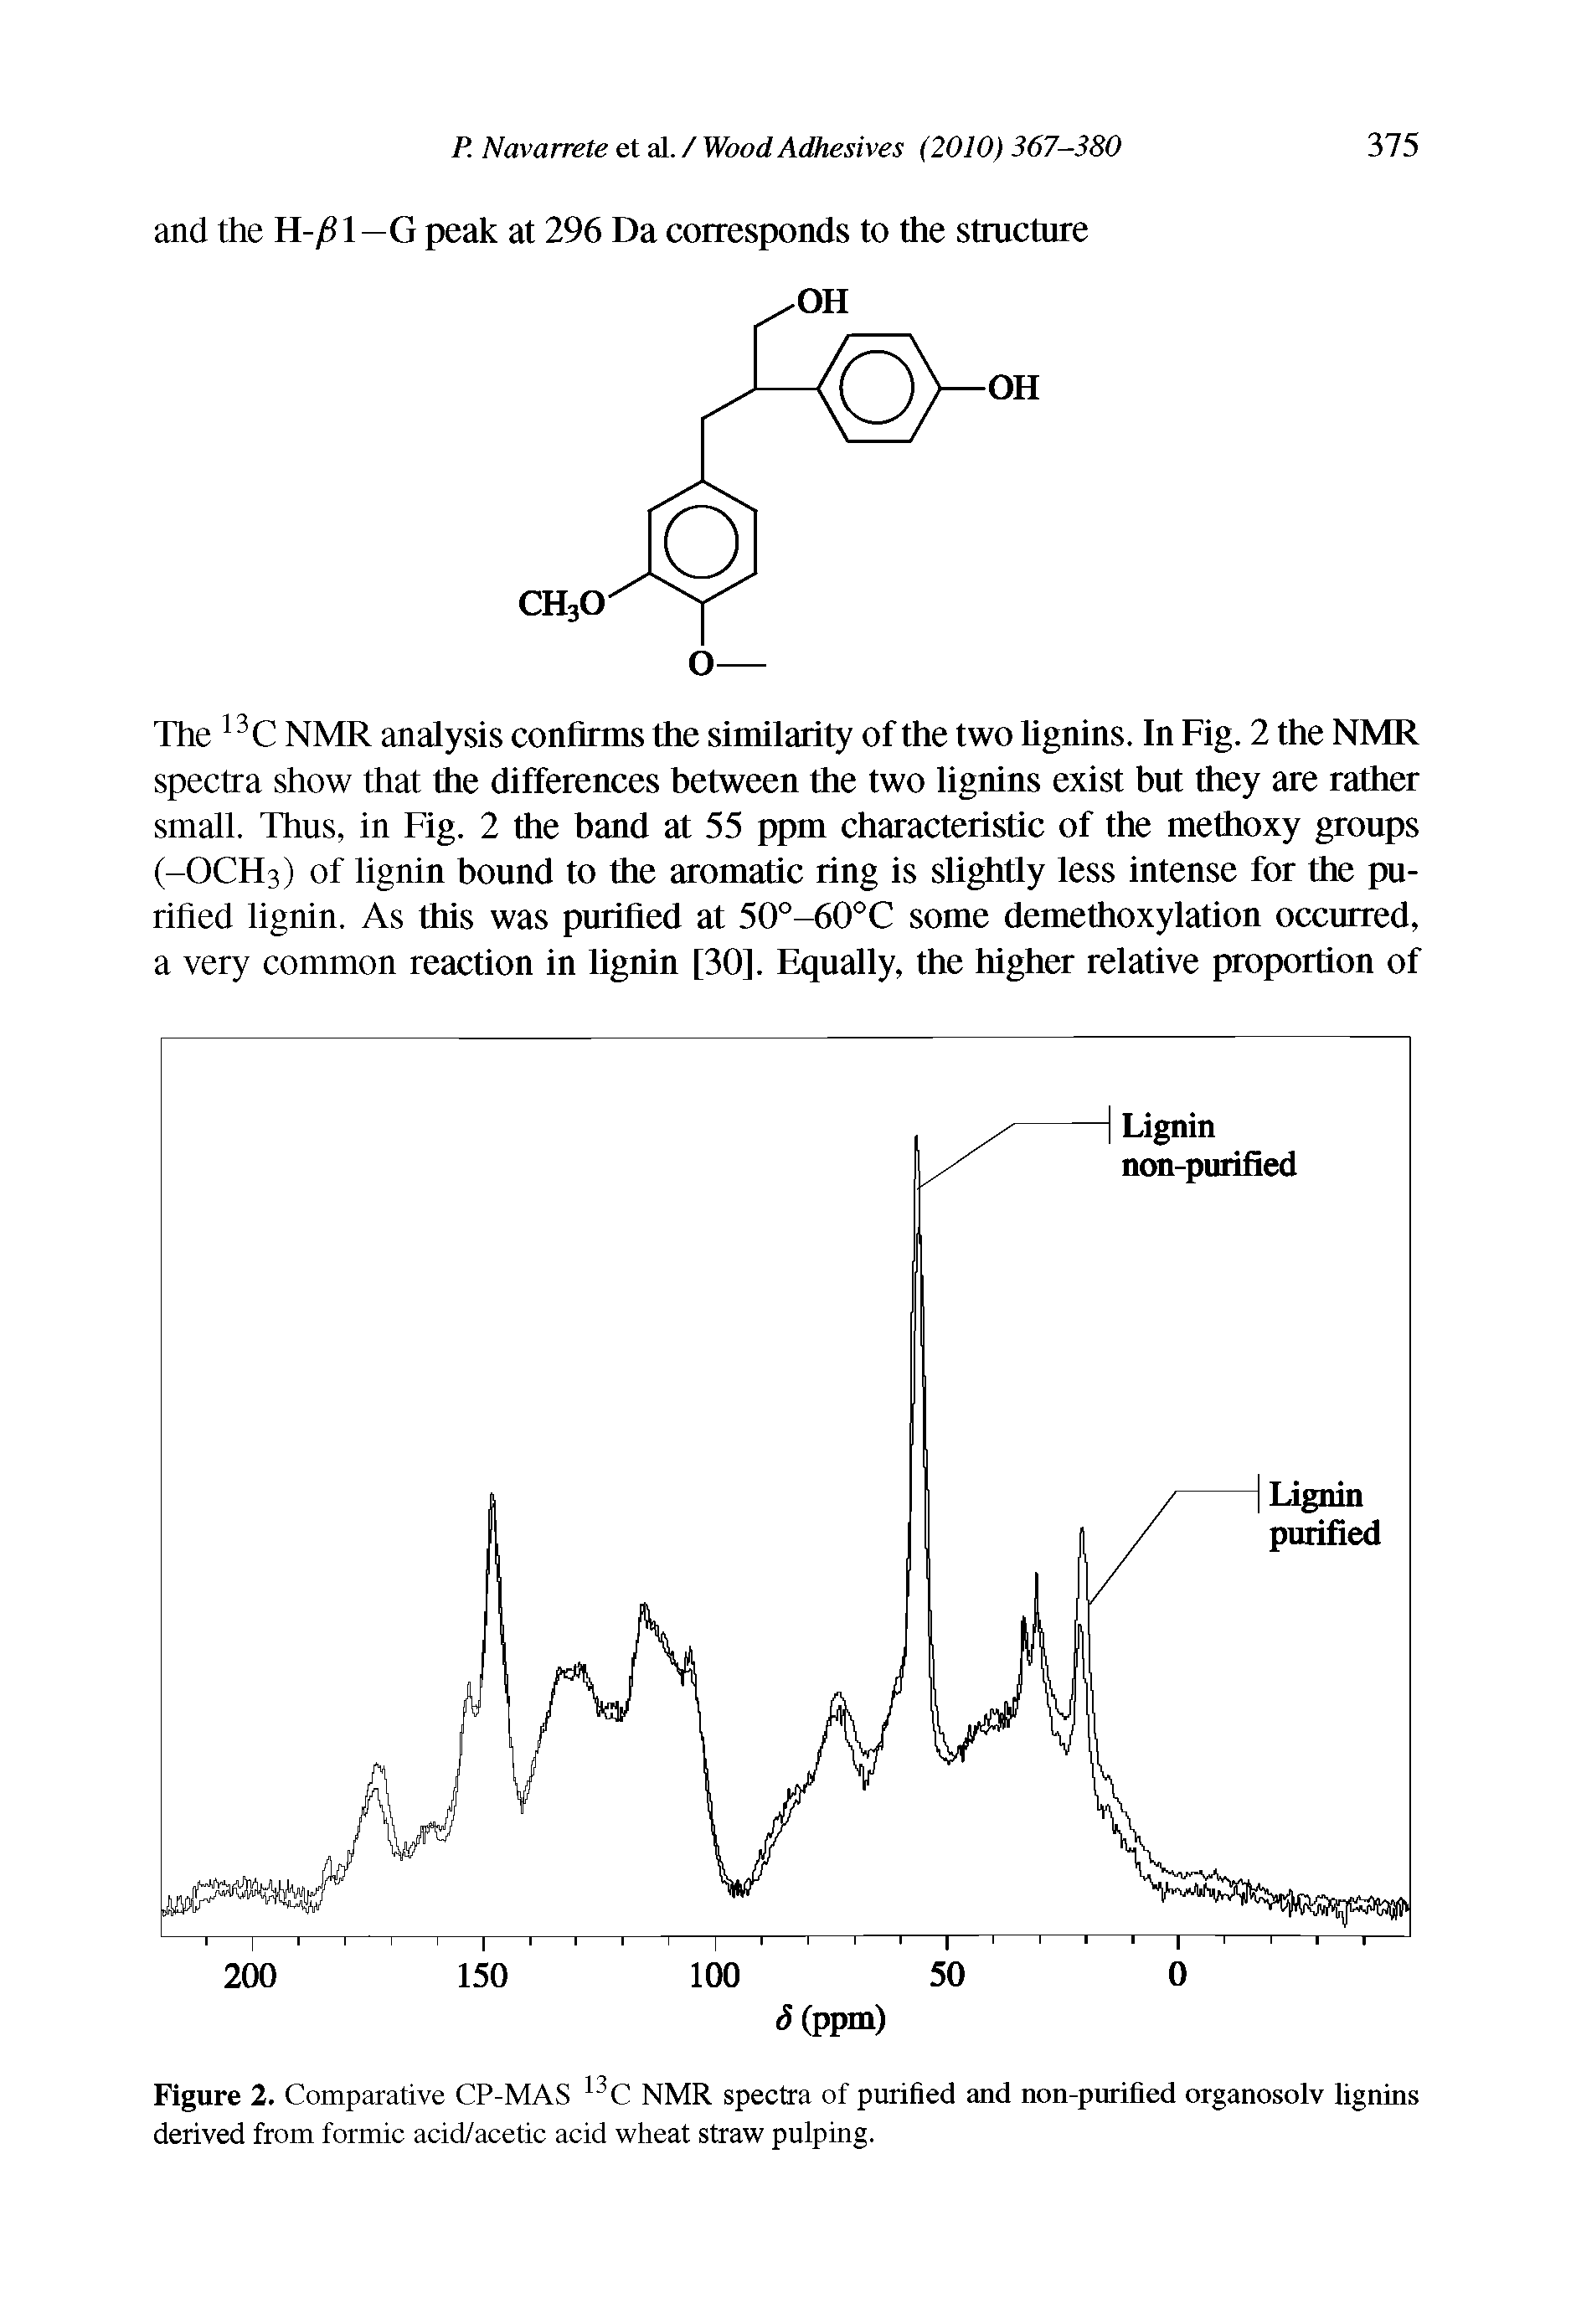 Figure 2. Comparative CP-MAS NMR spectra of purified and non-purified organosolv lignins derived from formic acid/acetic acid wheat straw pulping.